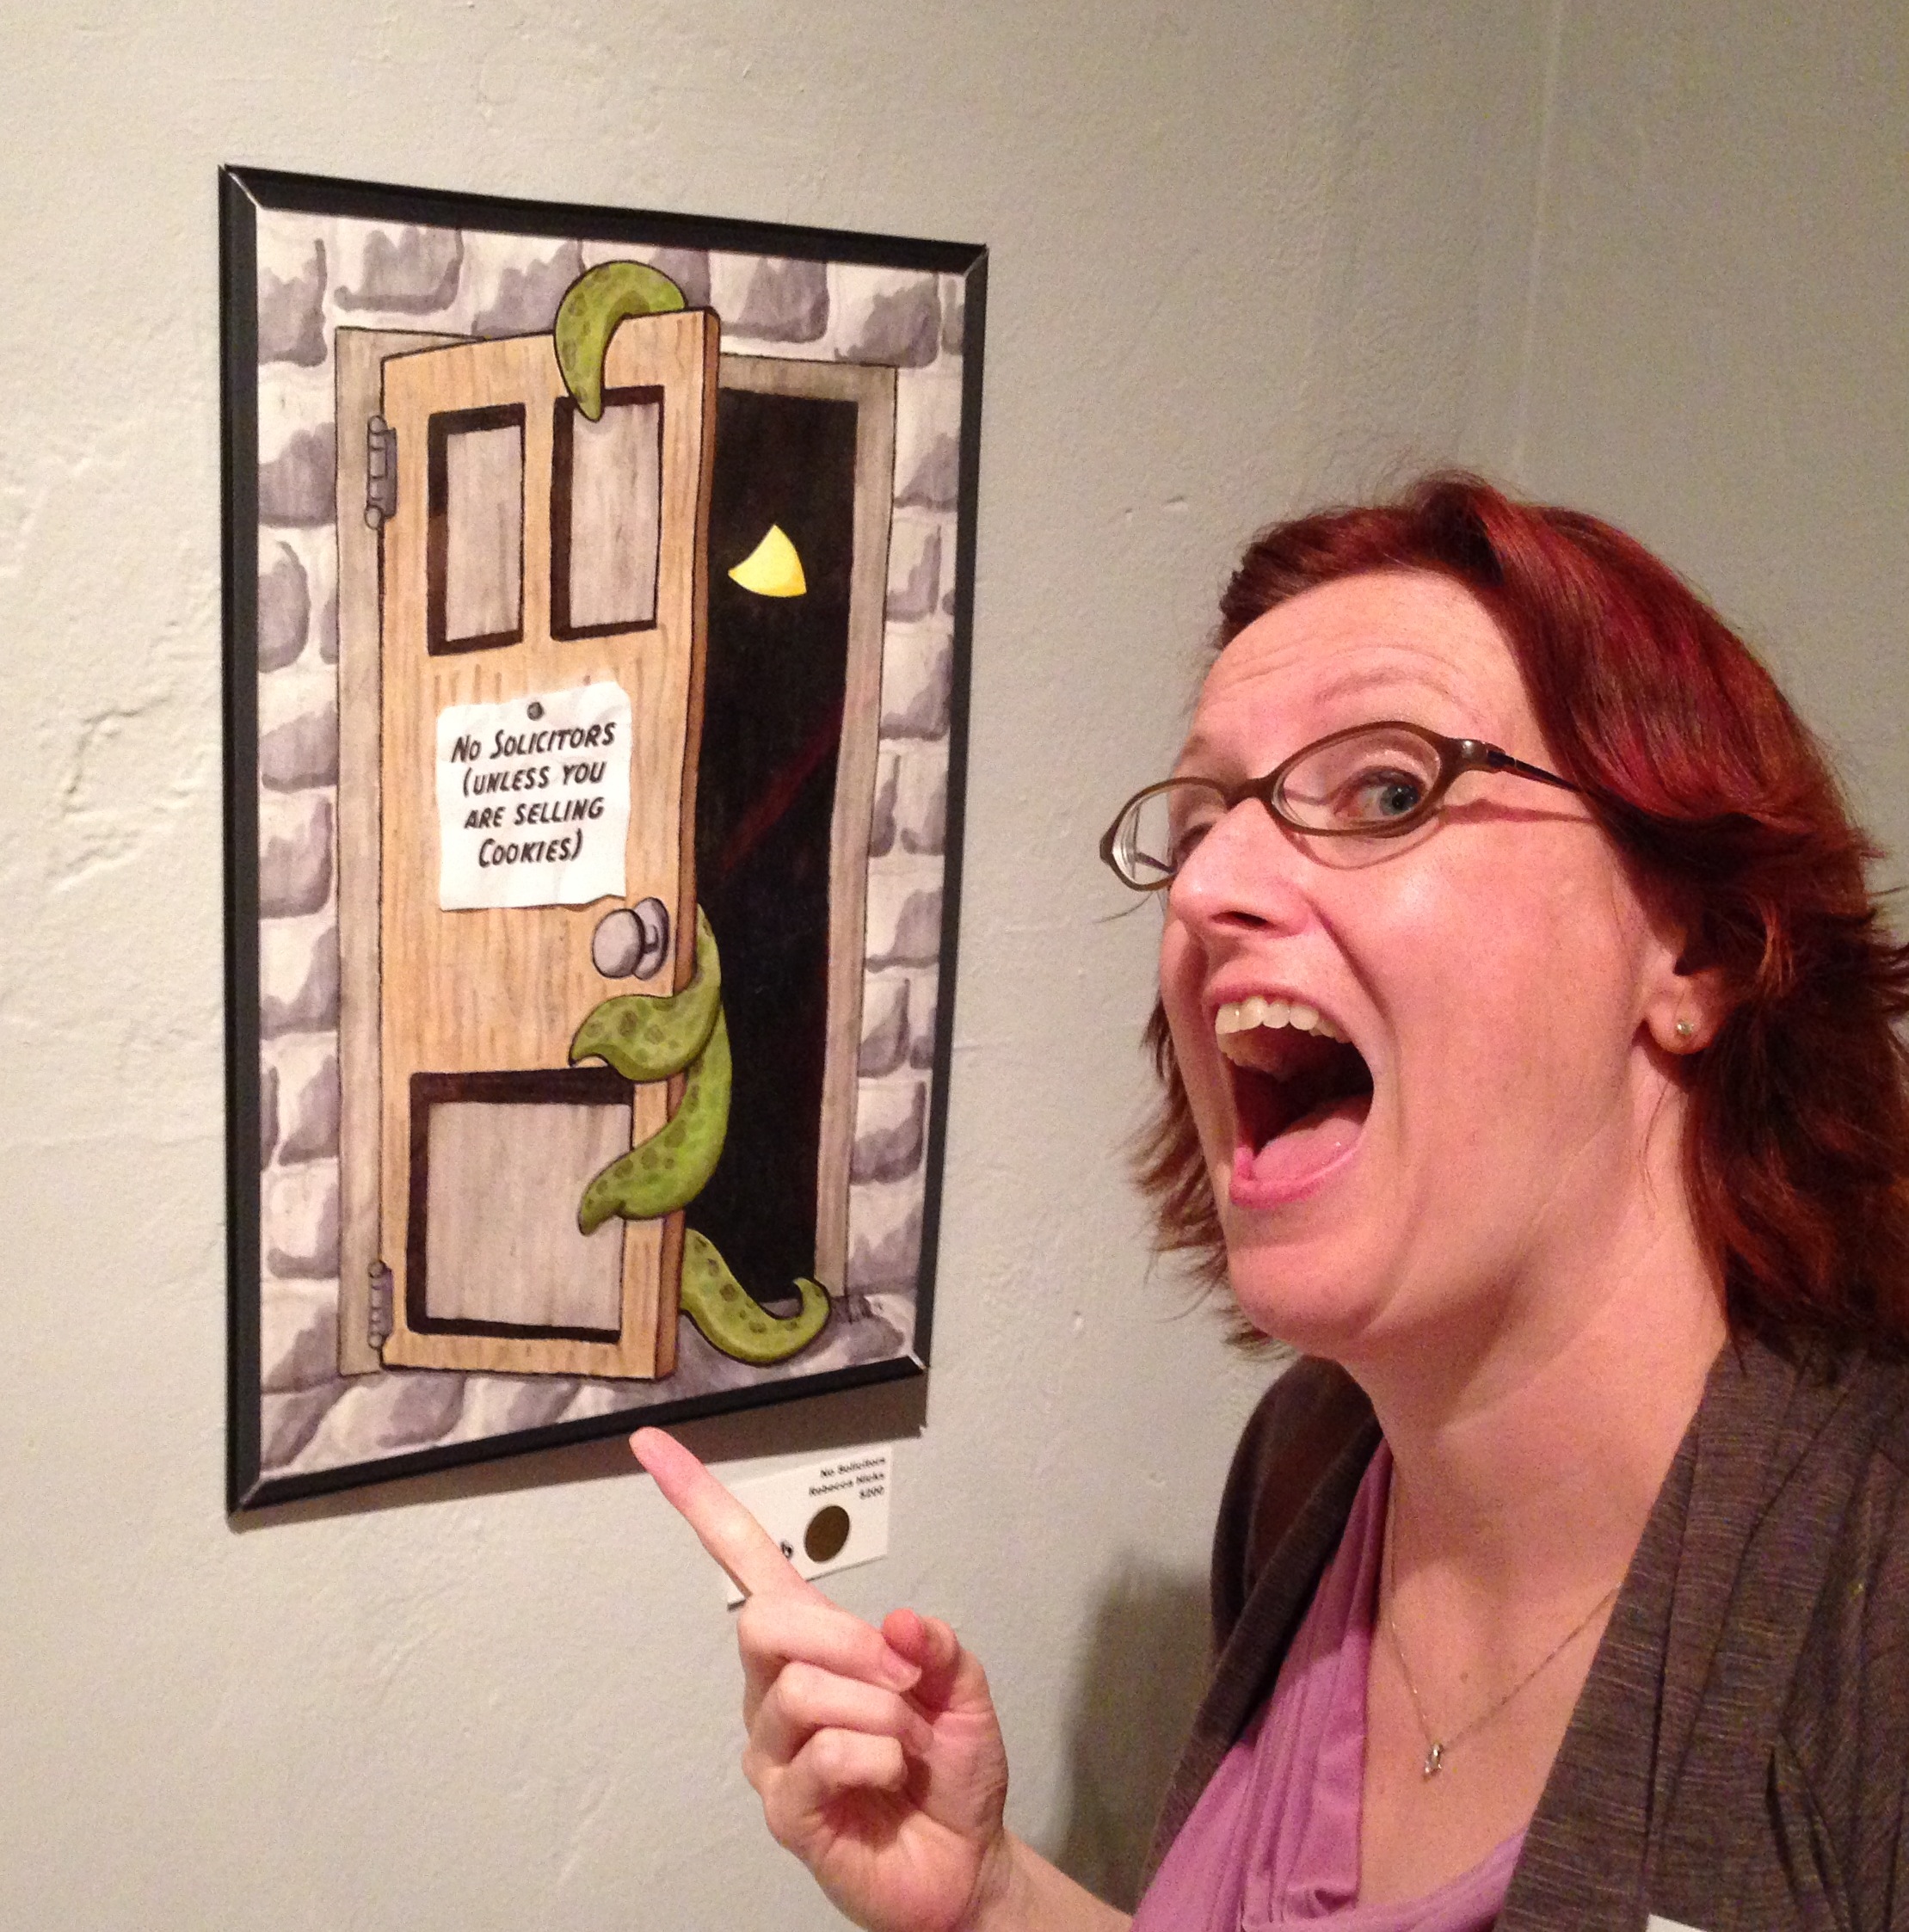 Photo of Rebecca Hicks posing in front of her newly-sold “No Solicitors” artwork